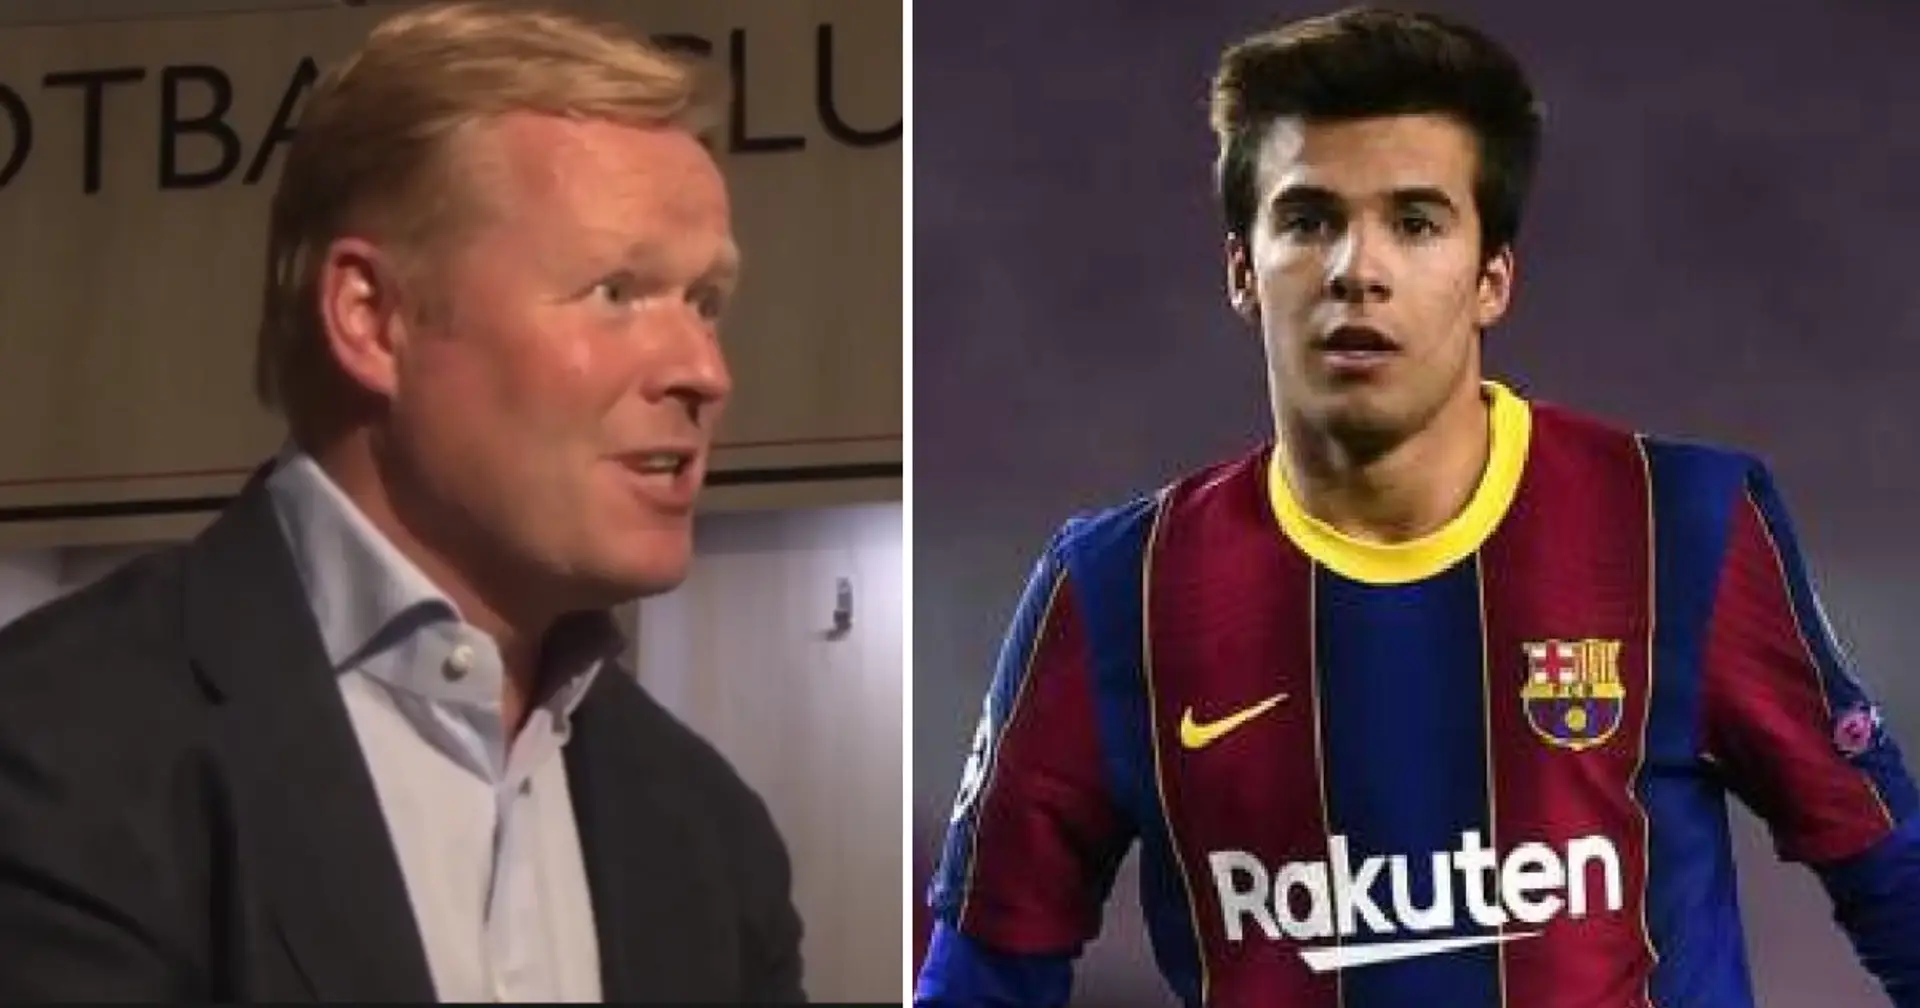 One year ago Koeman identified 5 youngsters as 'future of Barca' -- where are they now?